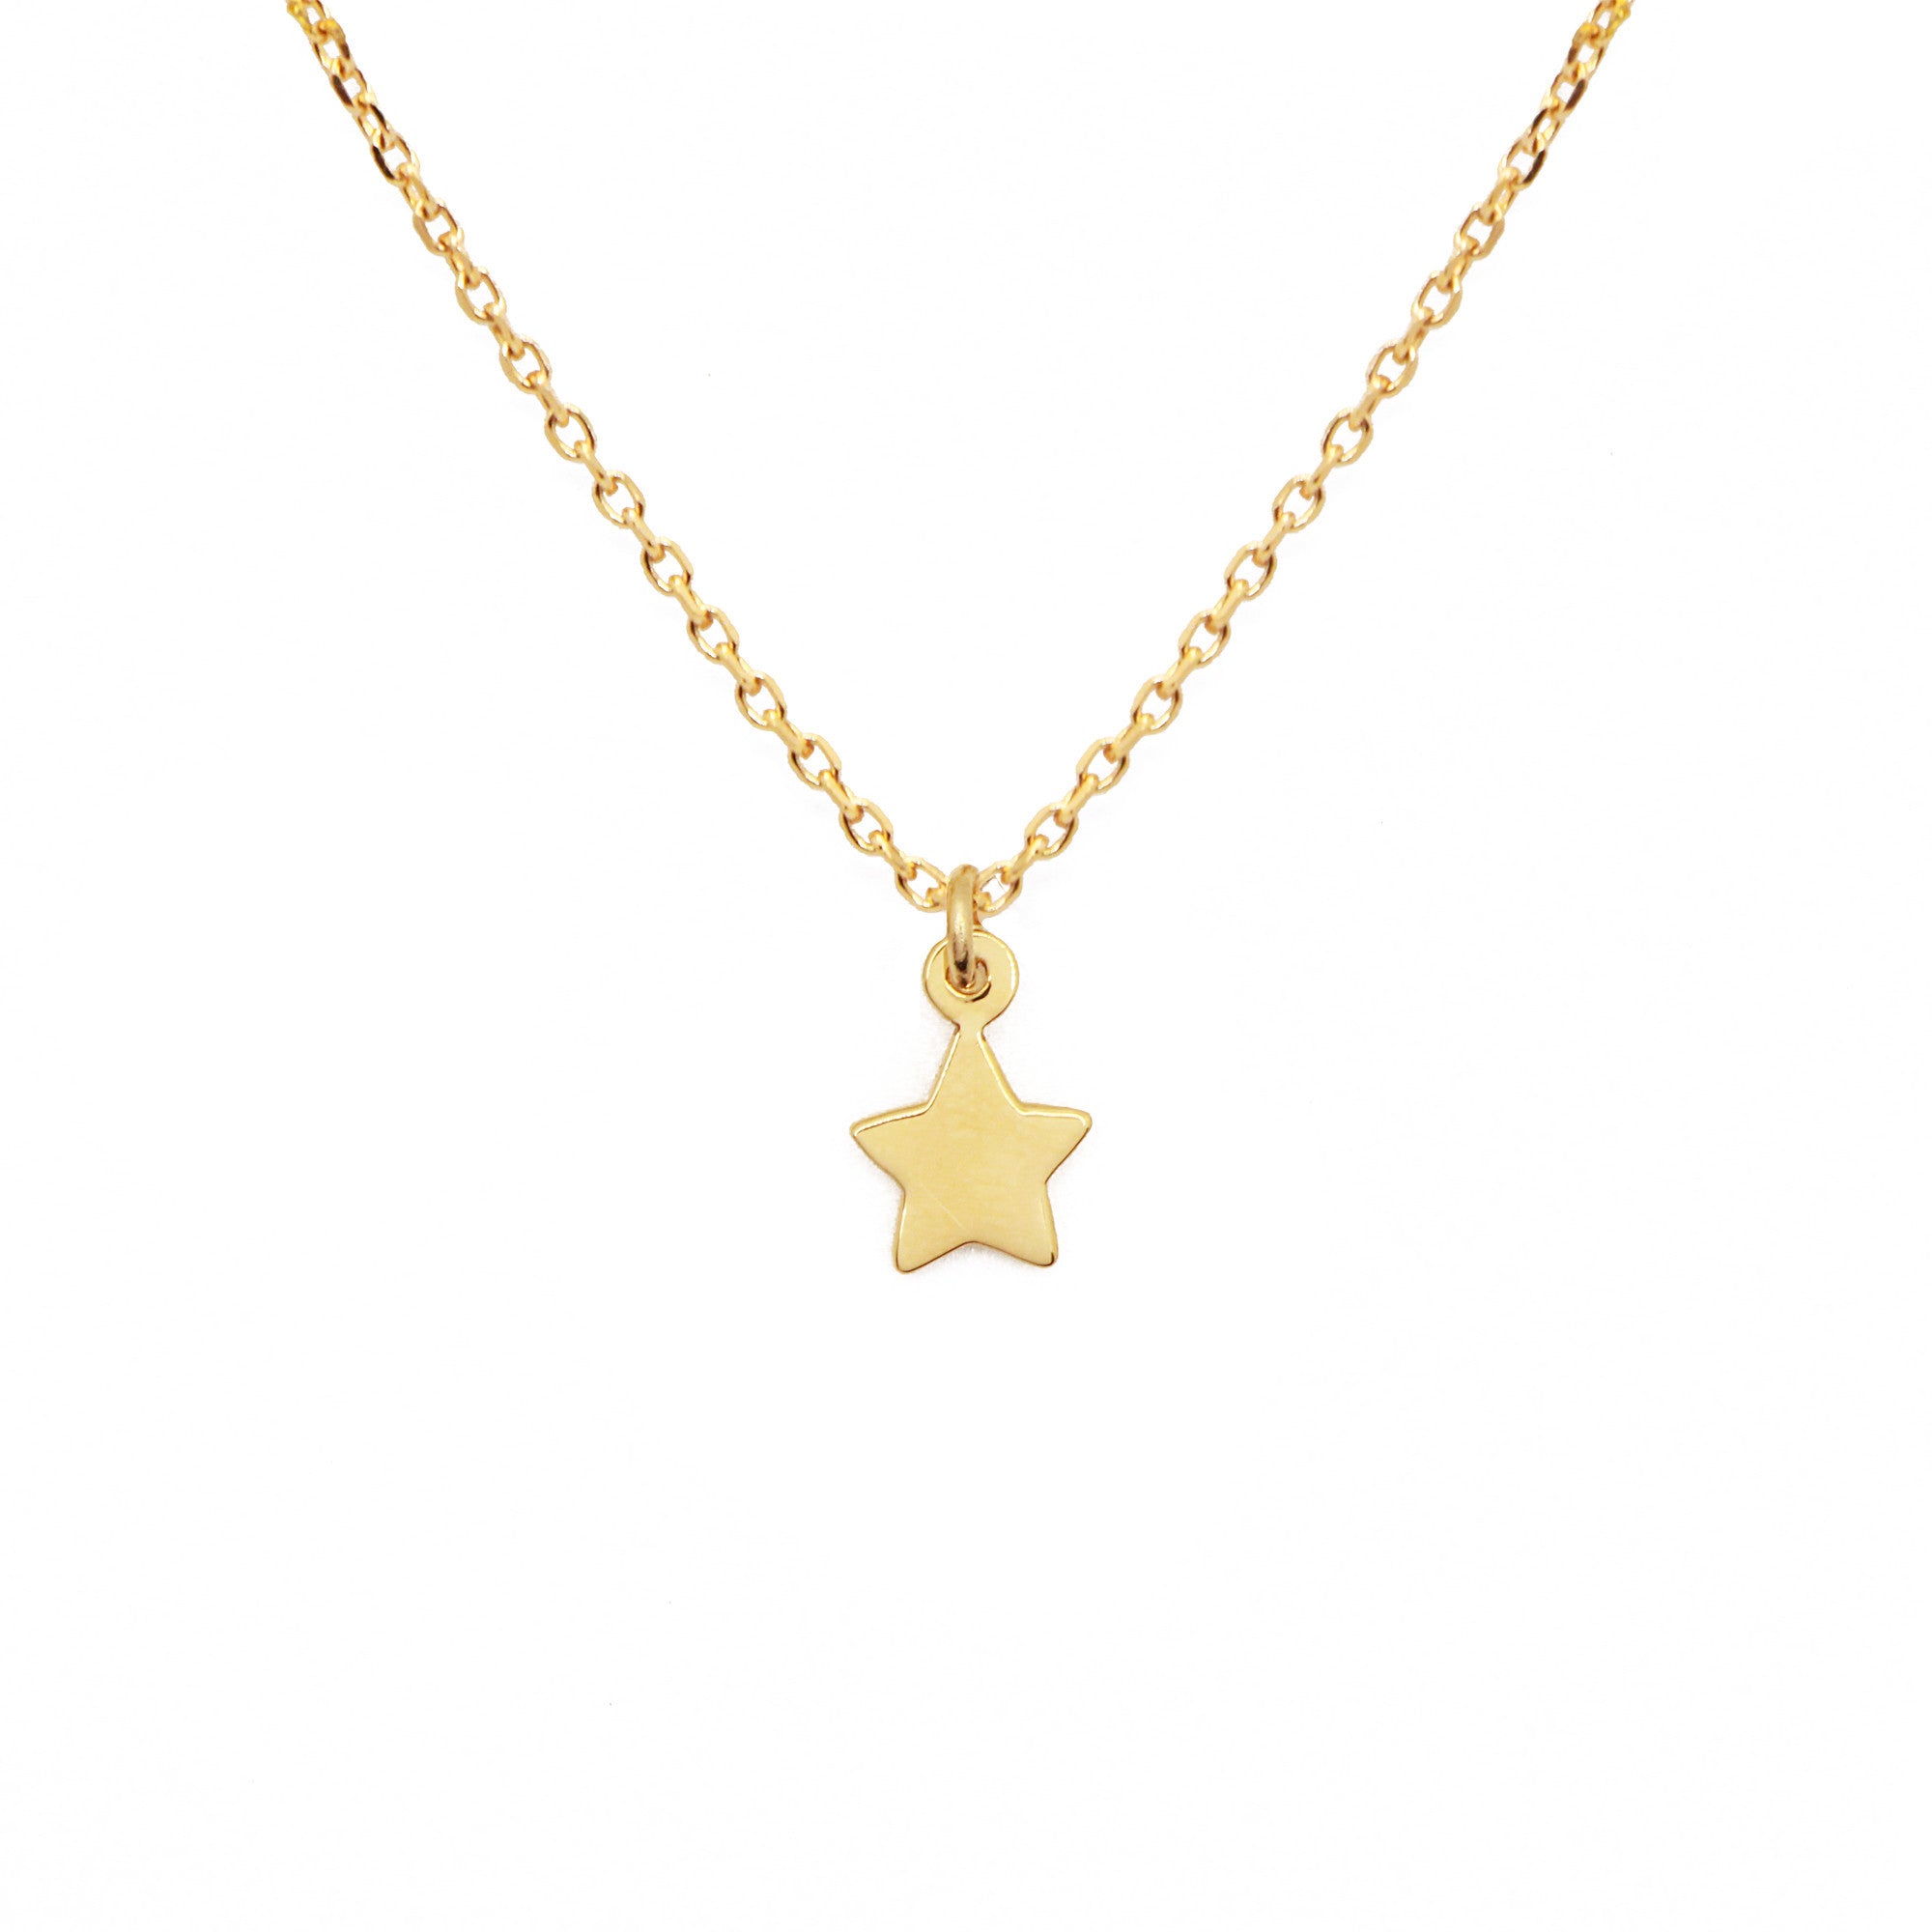 Star charm chain necklace